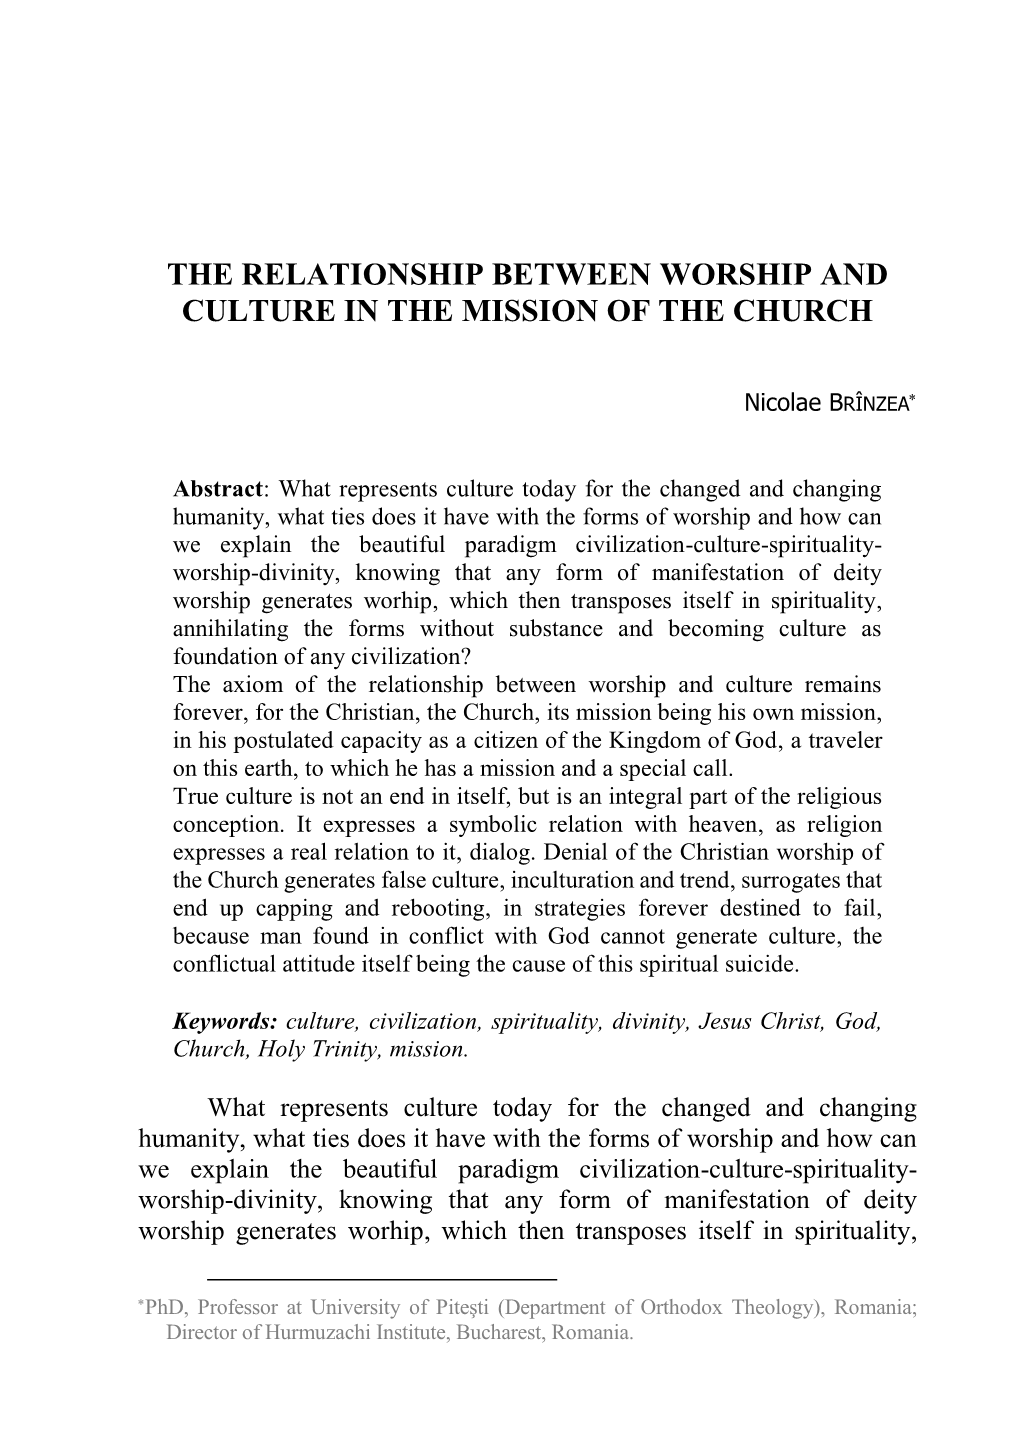 The Relationship Between Worship and Culture in the Mission of the Church